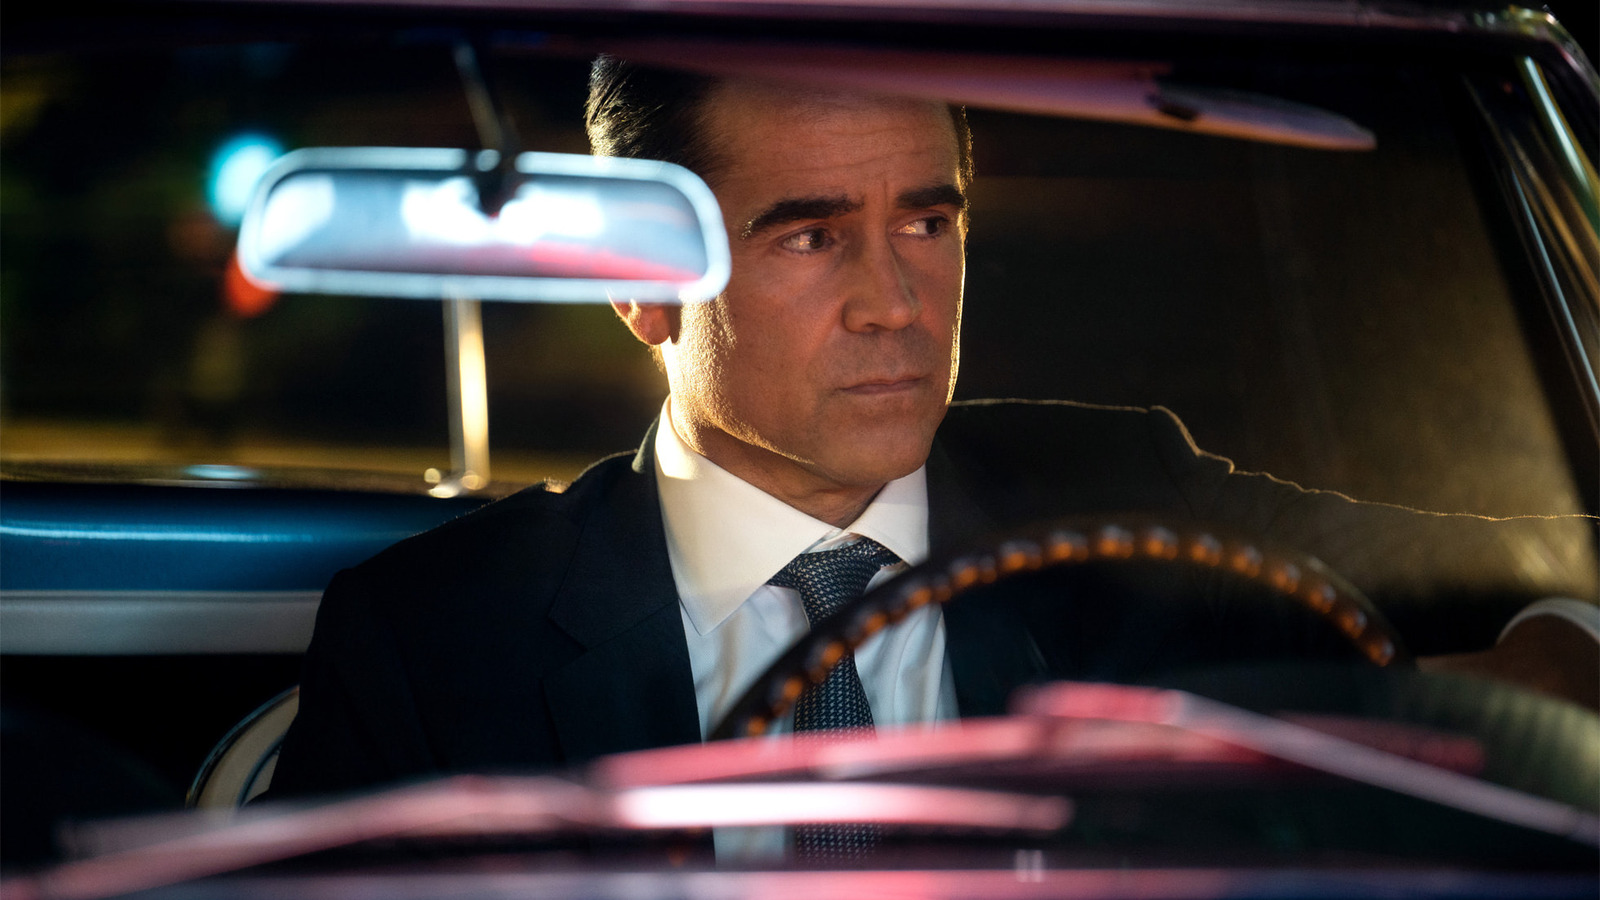 Colin Farrell’s TV Year Kicks Off With The Trailer For Sugar, His Apple TV+ Noir Drama